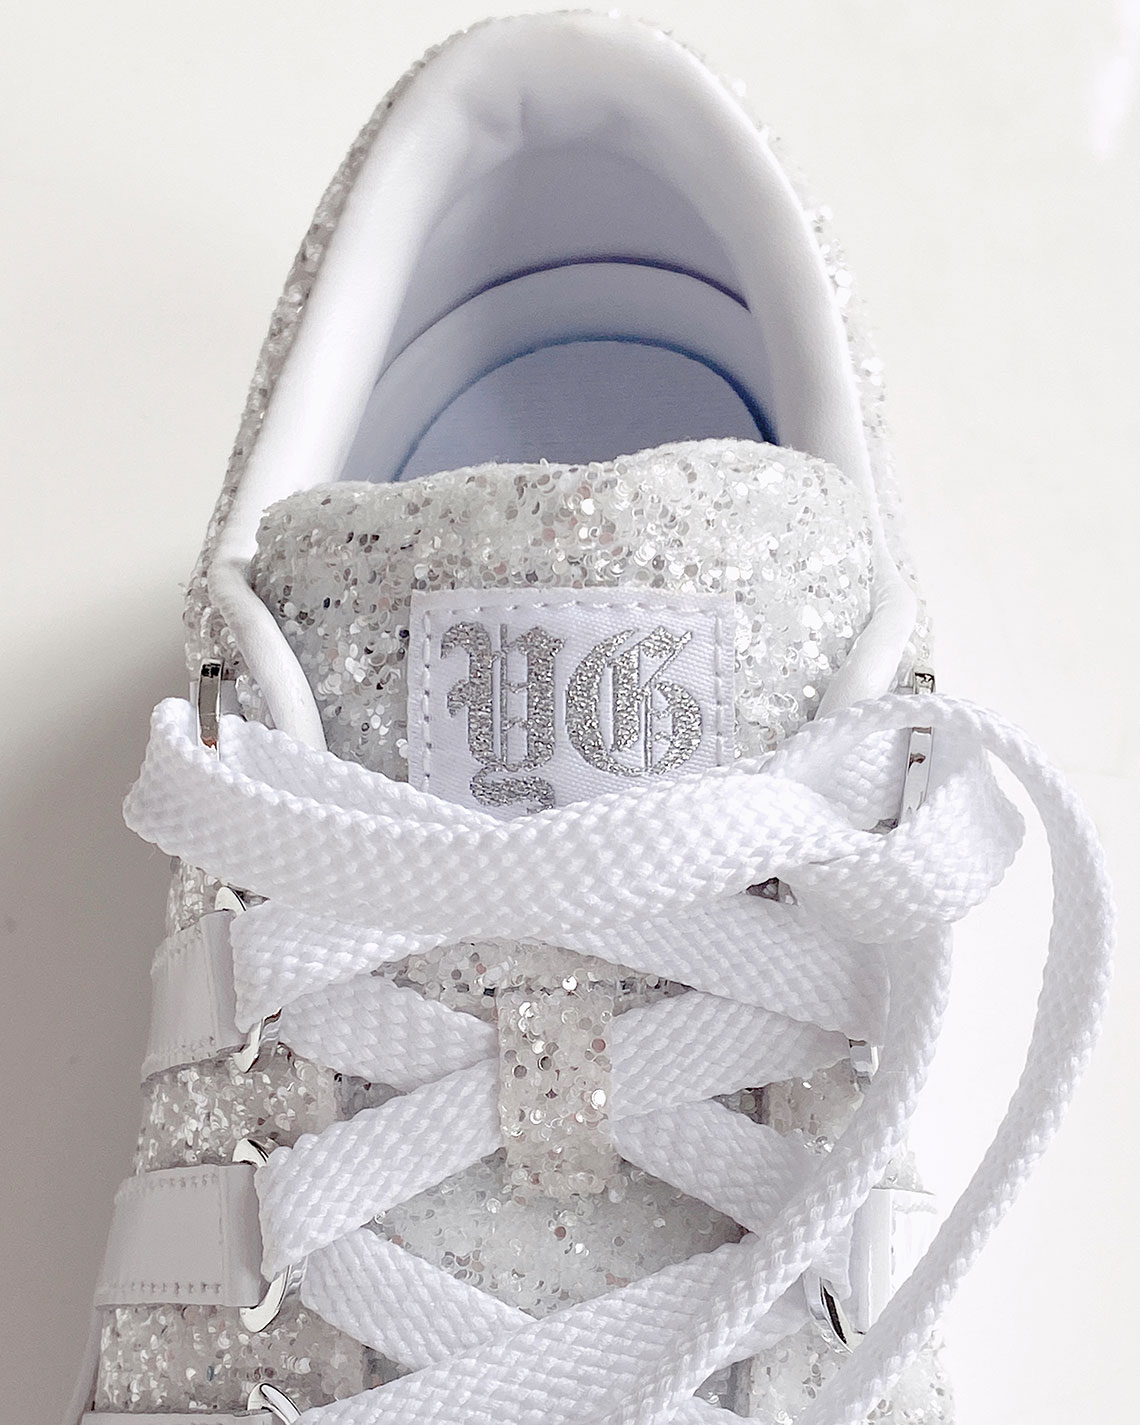 Yg And K Swiss Team Up For The Glitter Covered K Swiss Classic Lx Disco 4